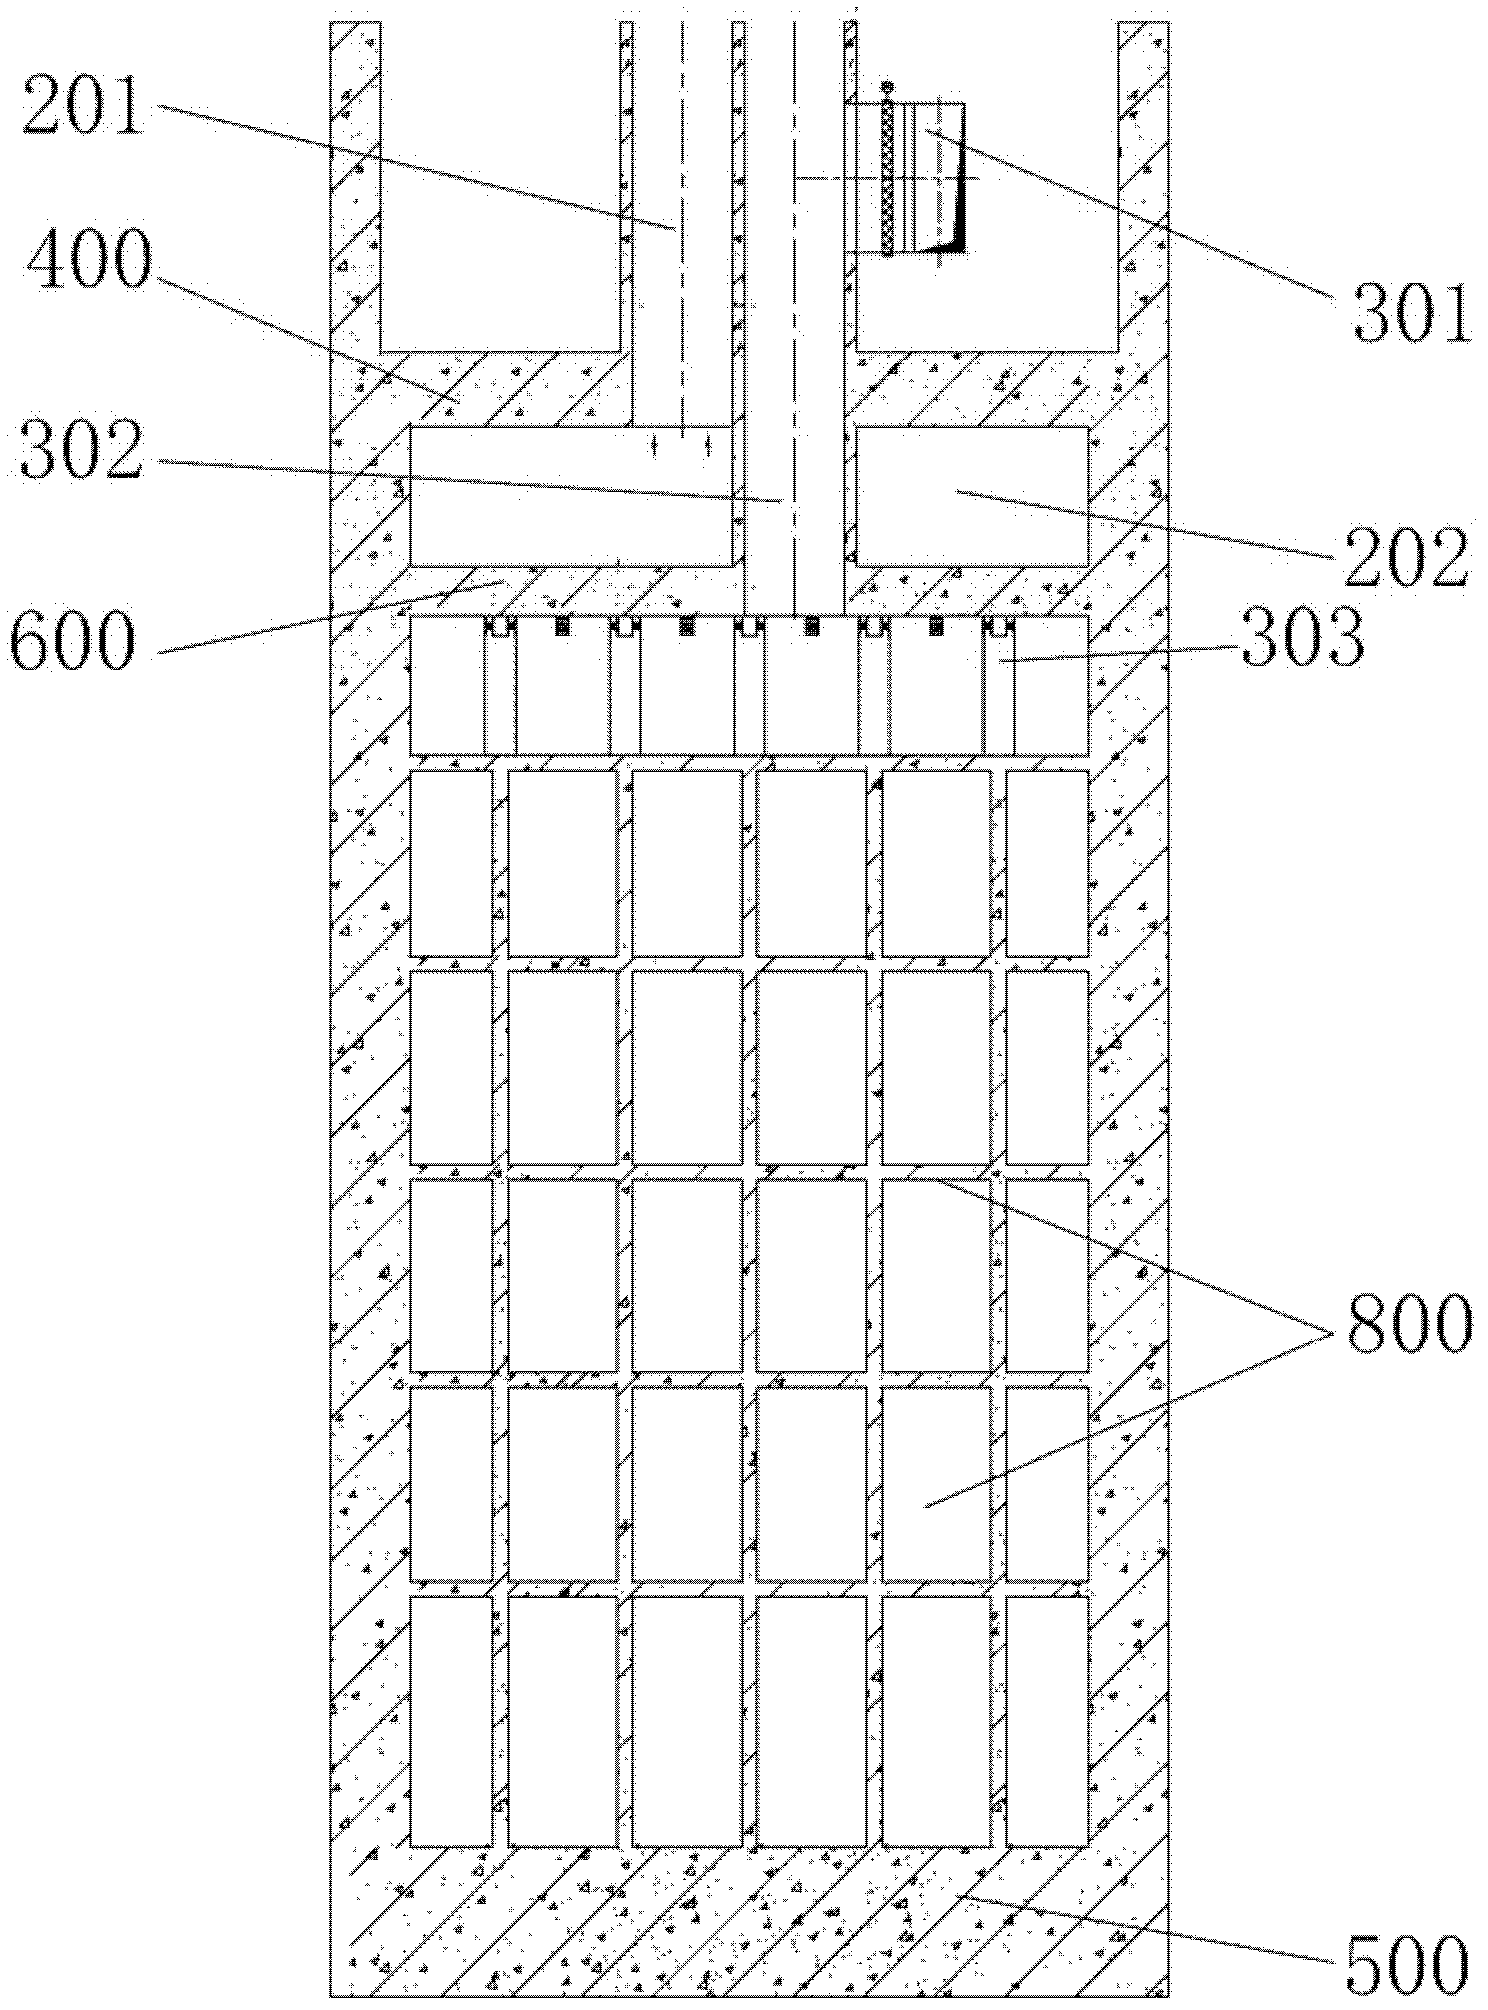 Vertical shaft storage system for spent fuel of nuclear power station